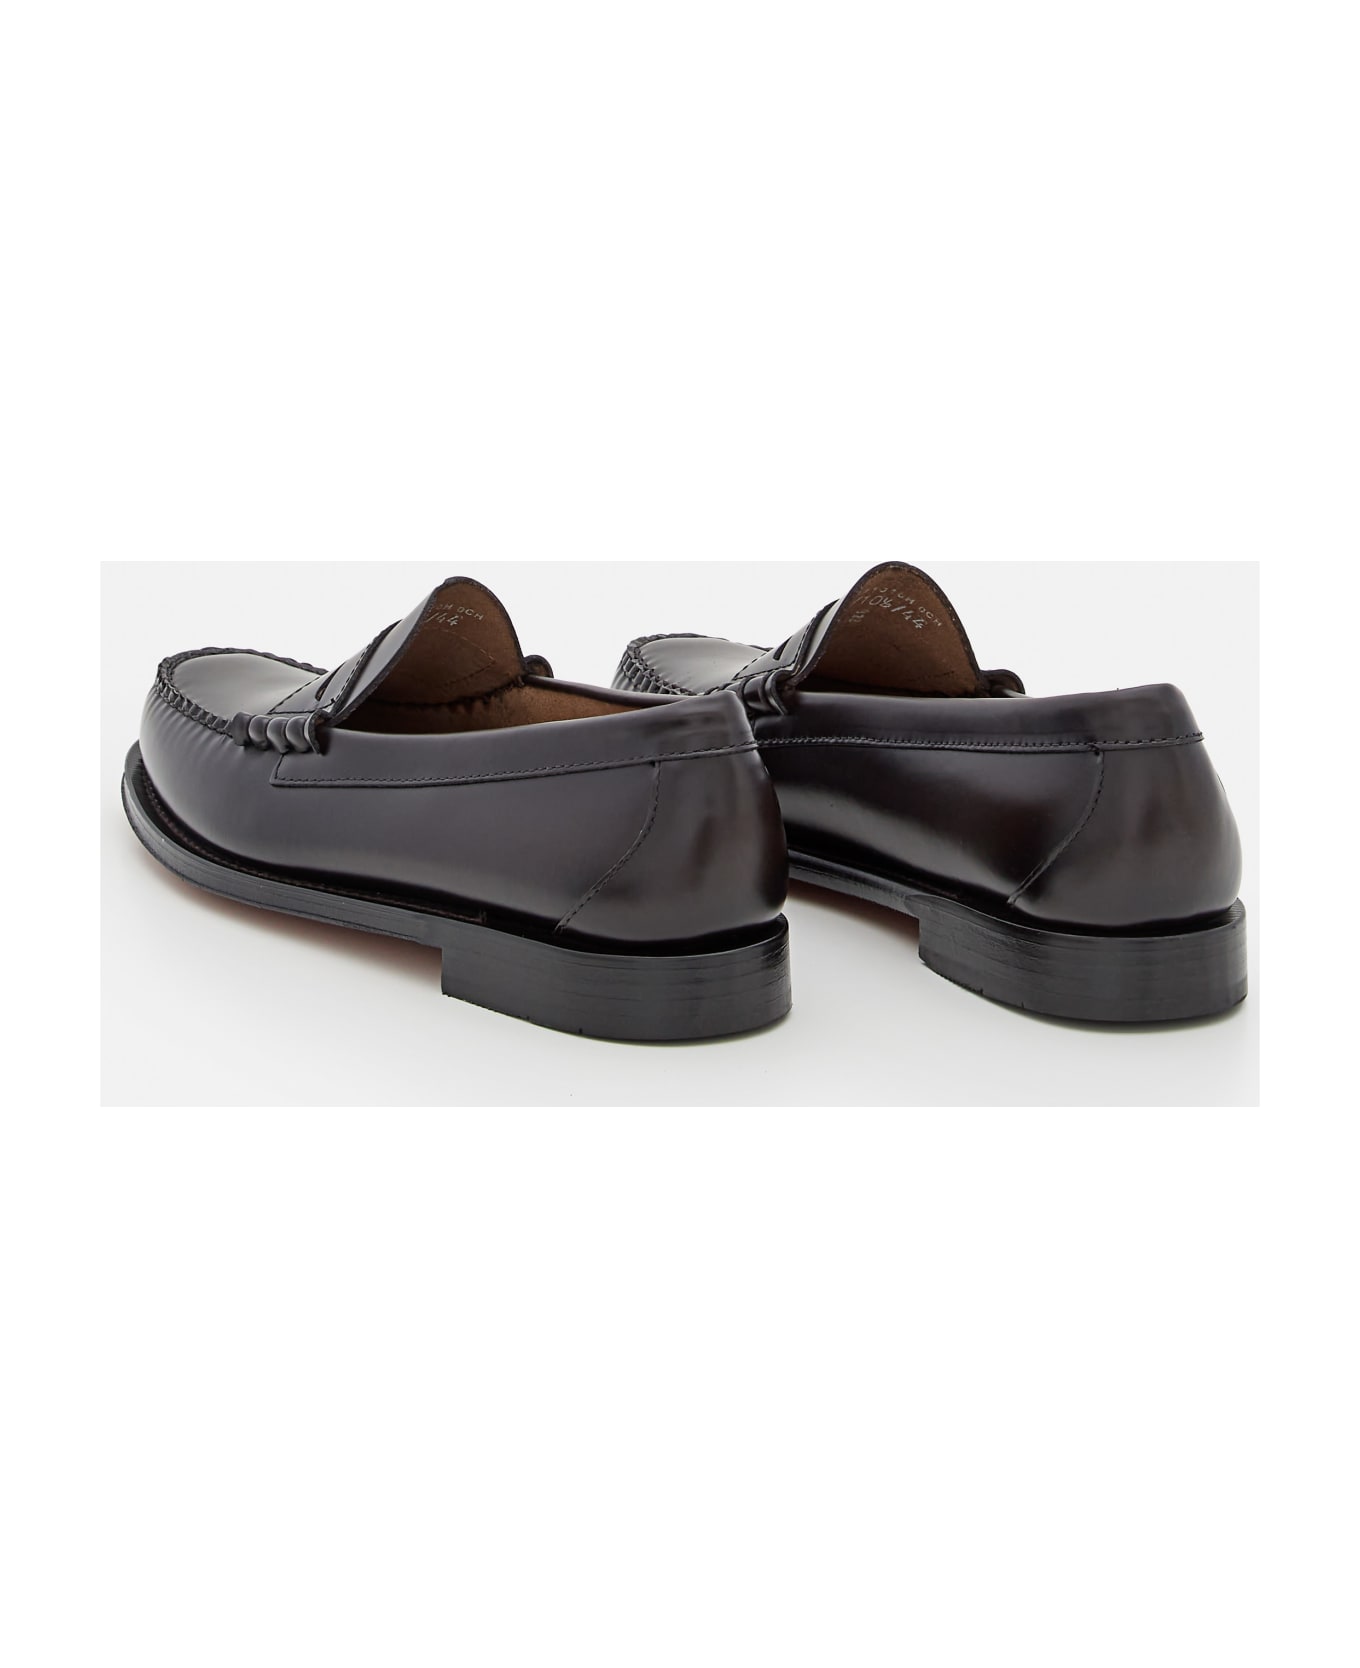 G.H.Bass & Co. Loafers - Brown